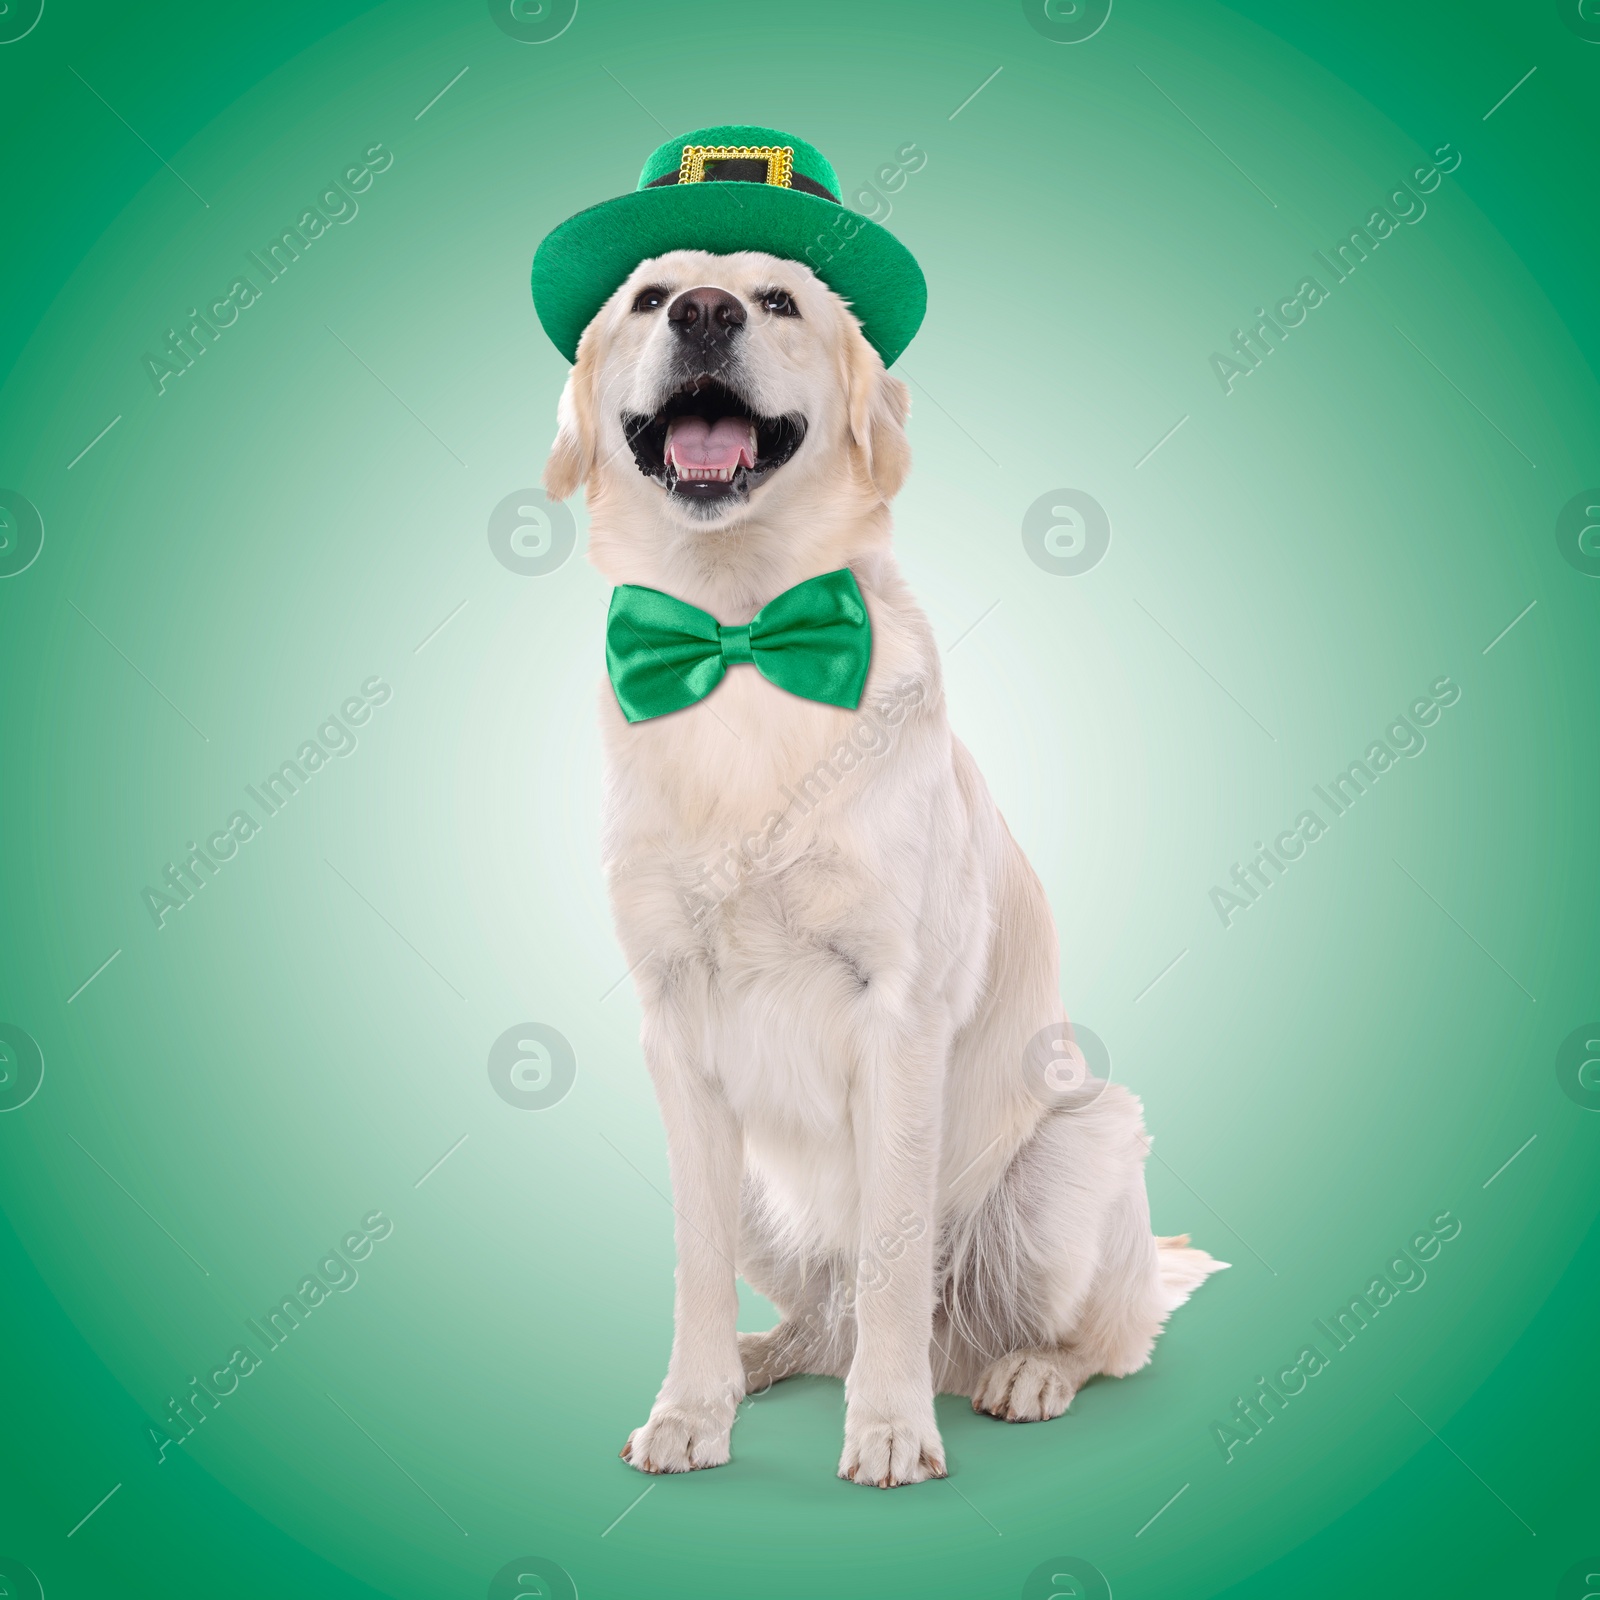 Image of St. Patrick's day celebration. Cute Golden Retriever dog with leprechaun hat and bow tie on green background